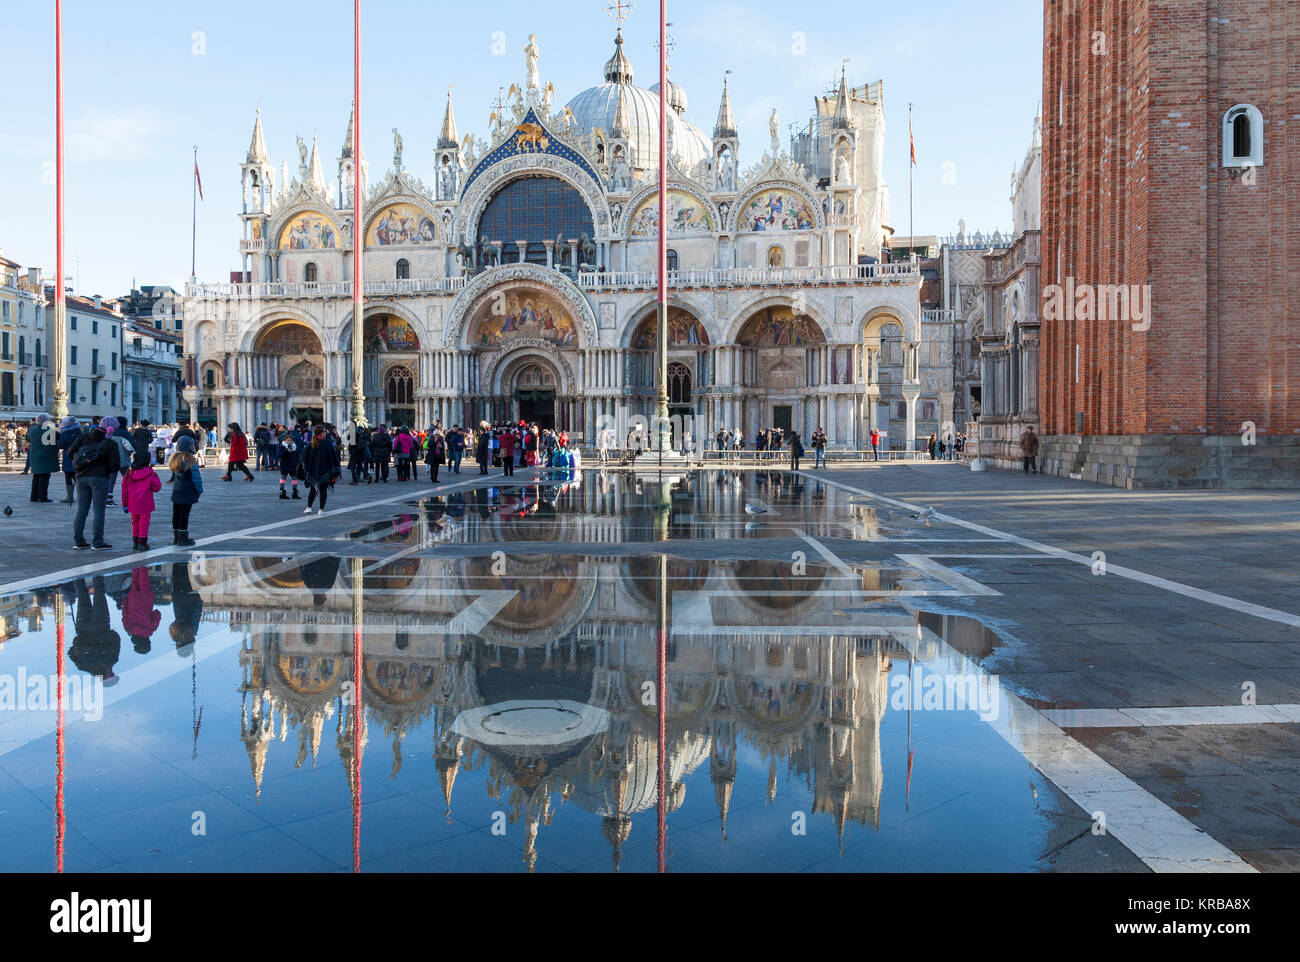 Basilica San Marco reflected in Acqua Alta, or flooding caused by extreme high tides from the lagoon,  in Piazza San Marco, Venice, Italy Stock Photo